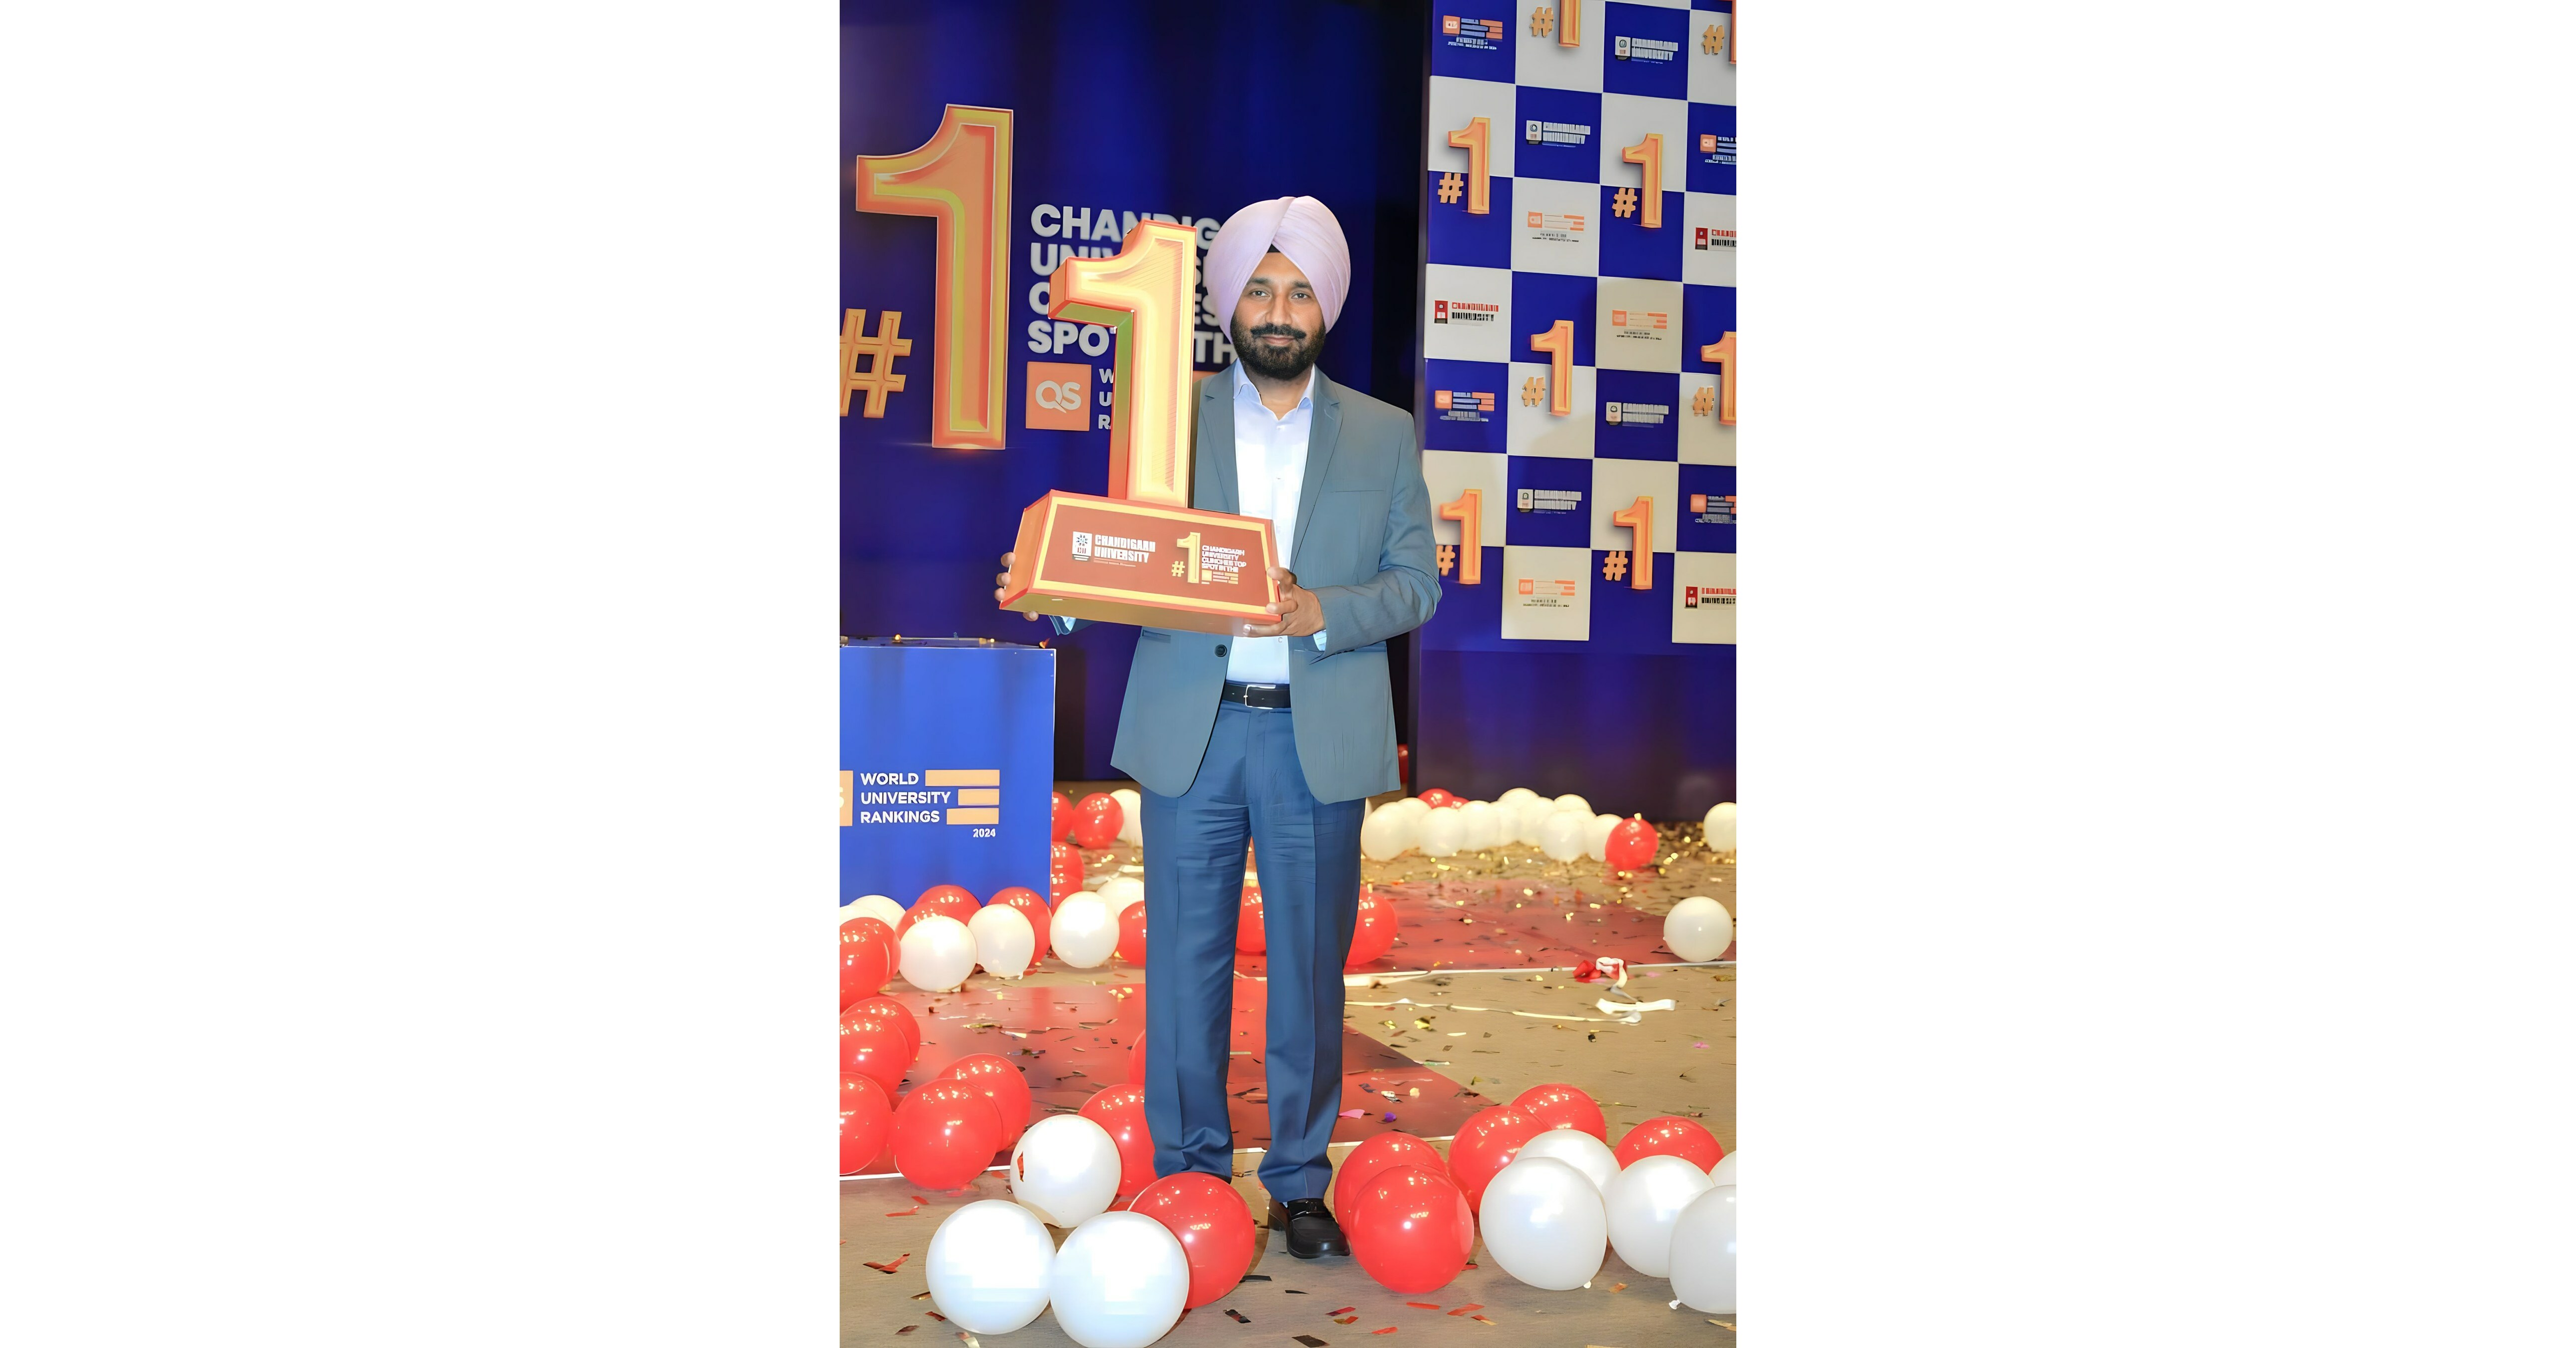 Chandigarh University ranked number 1 private university in India in